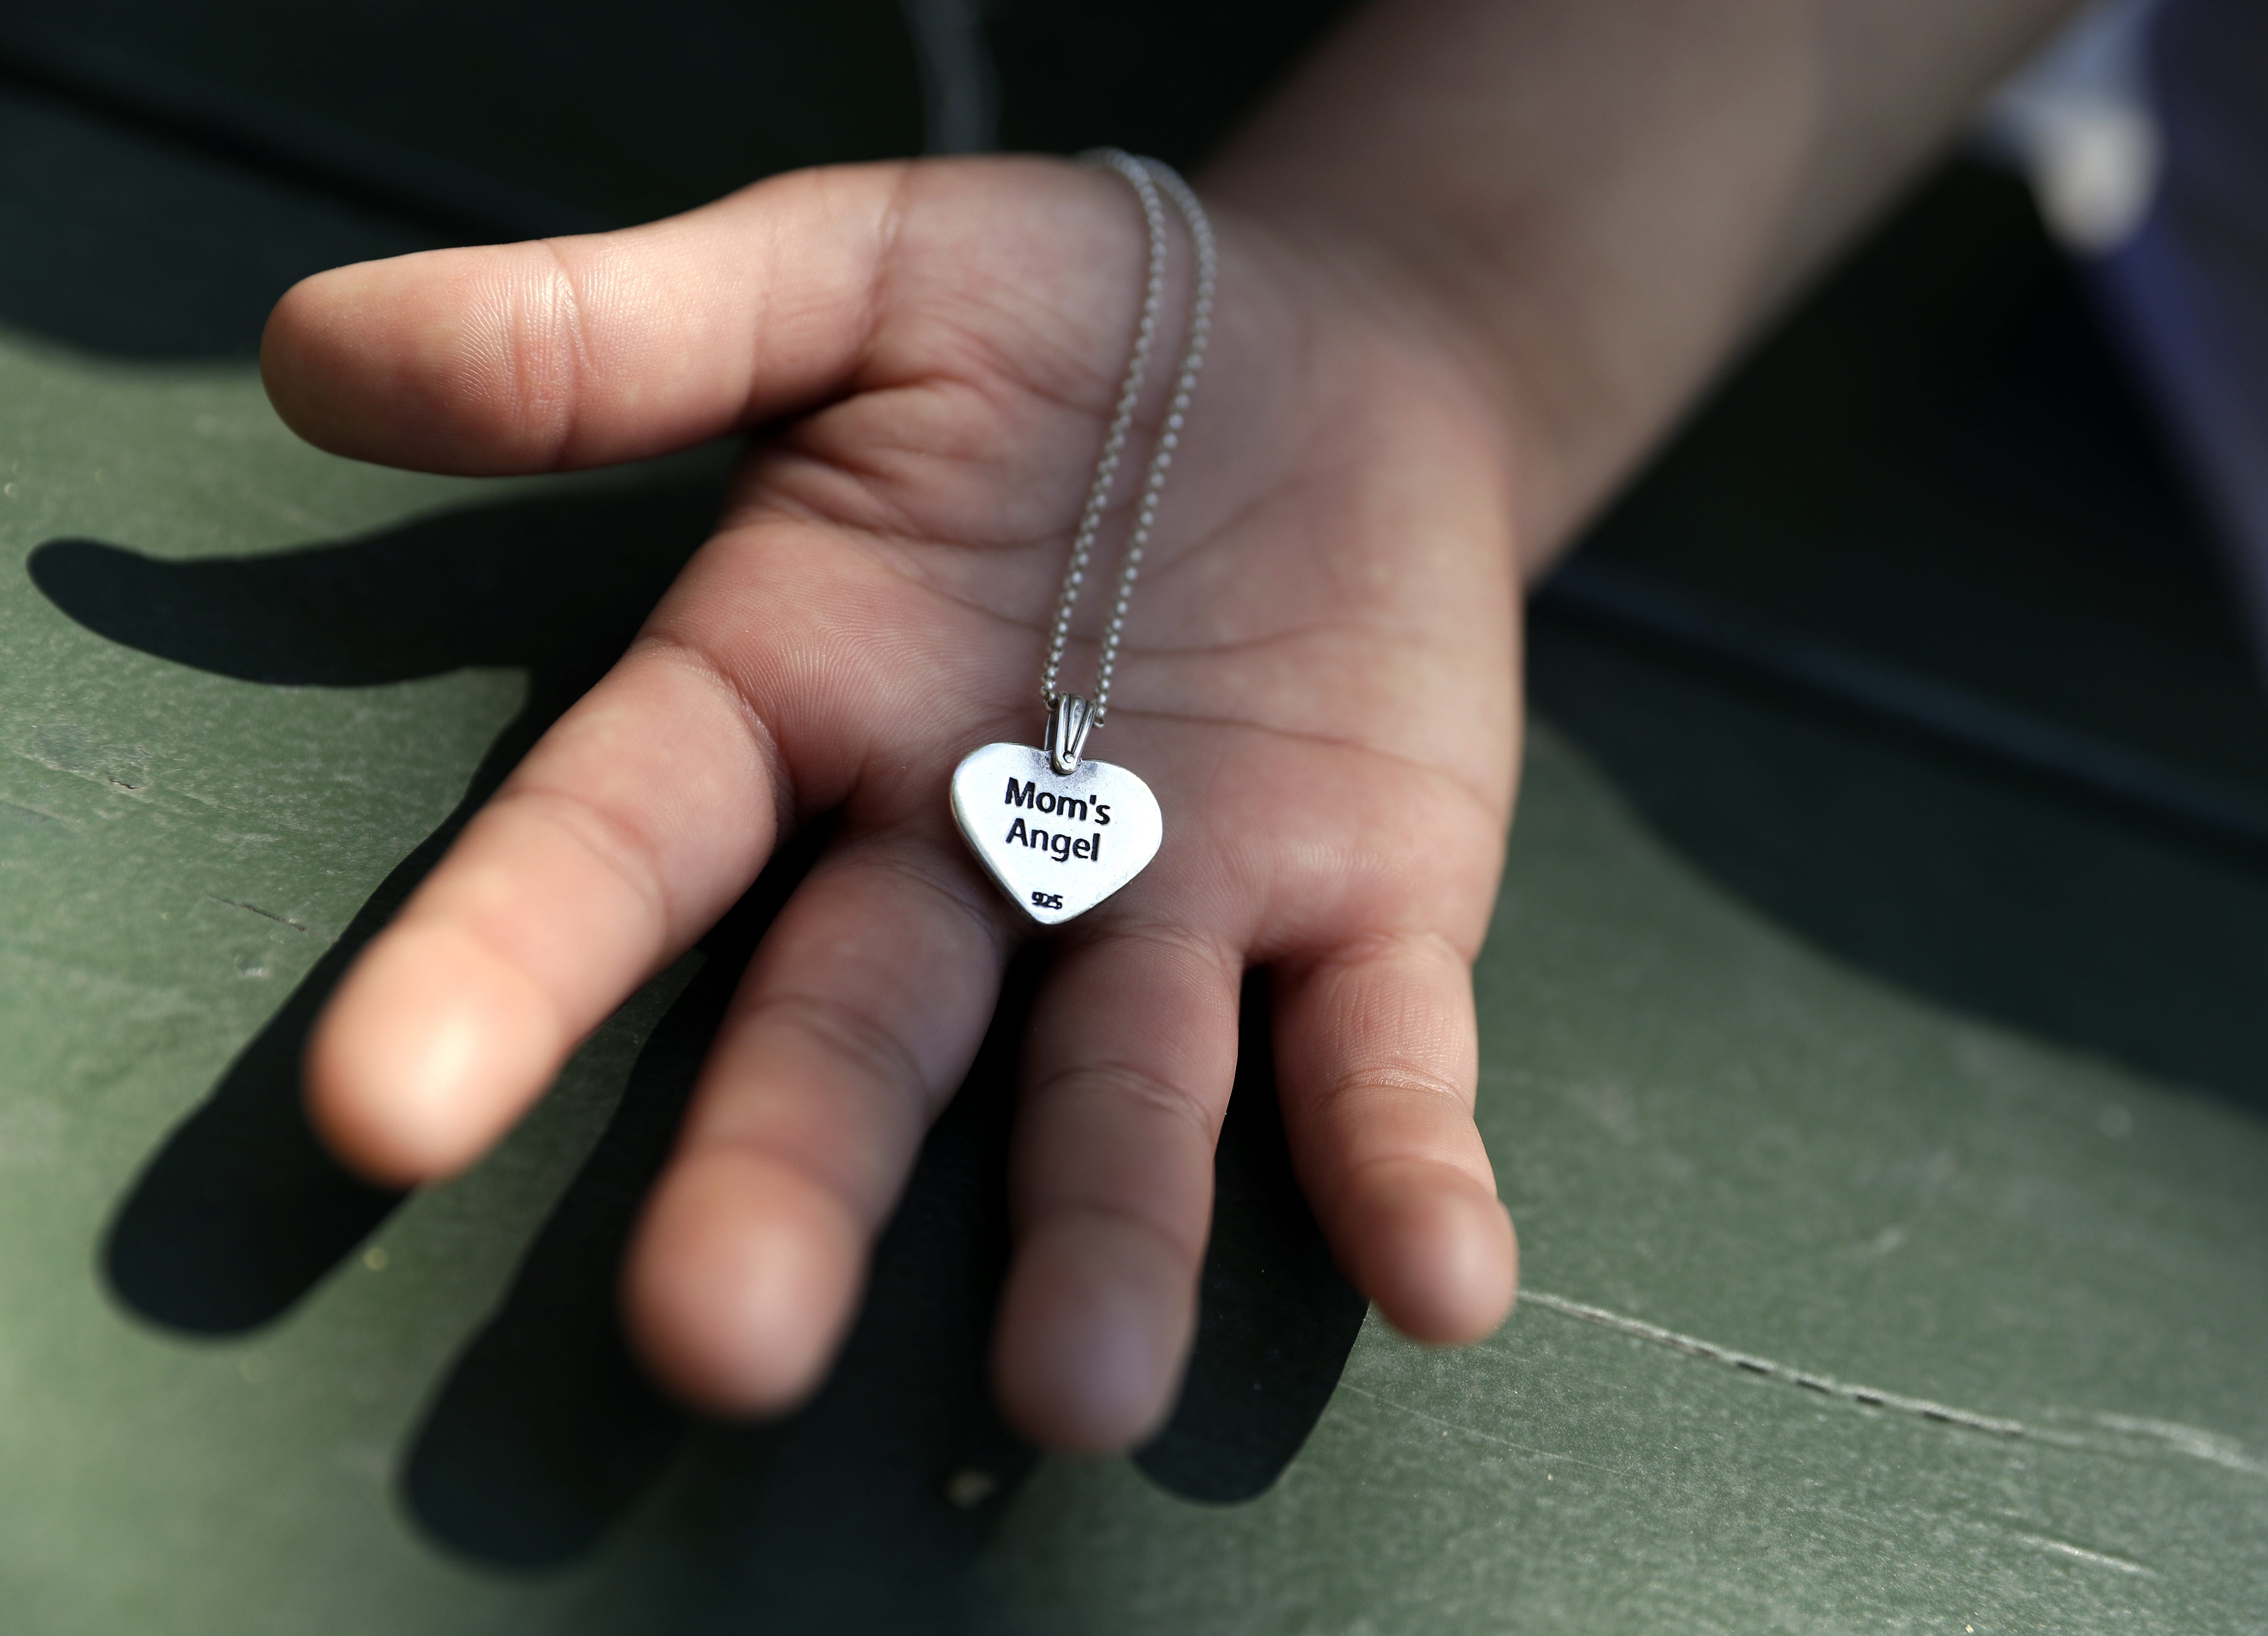 Concepcion Melgar wears a heart-shaped necklace that says "Mom's Angel" on one side. The other side has the fingerprint of her son Federico Abarca Jr., who was killed in February 2019. Sarah Kloepping/USA TODAY NETWORK-Wisconsin